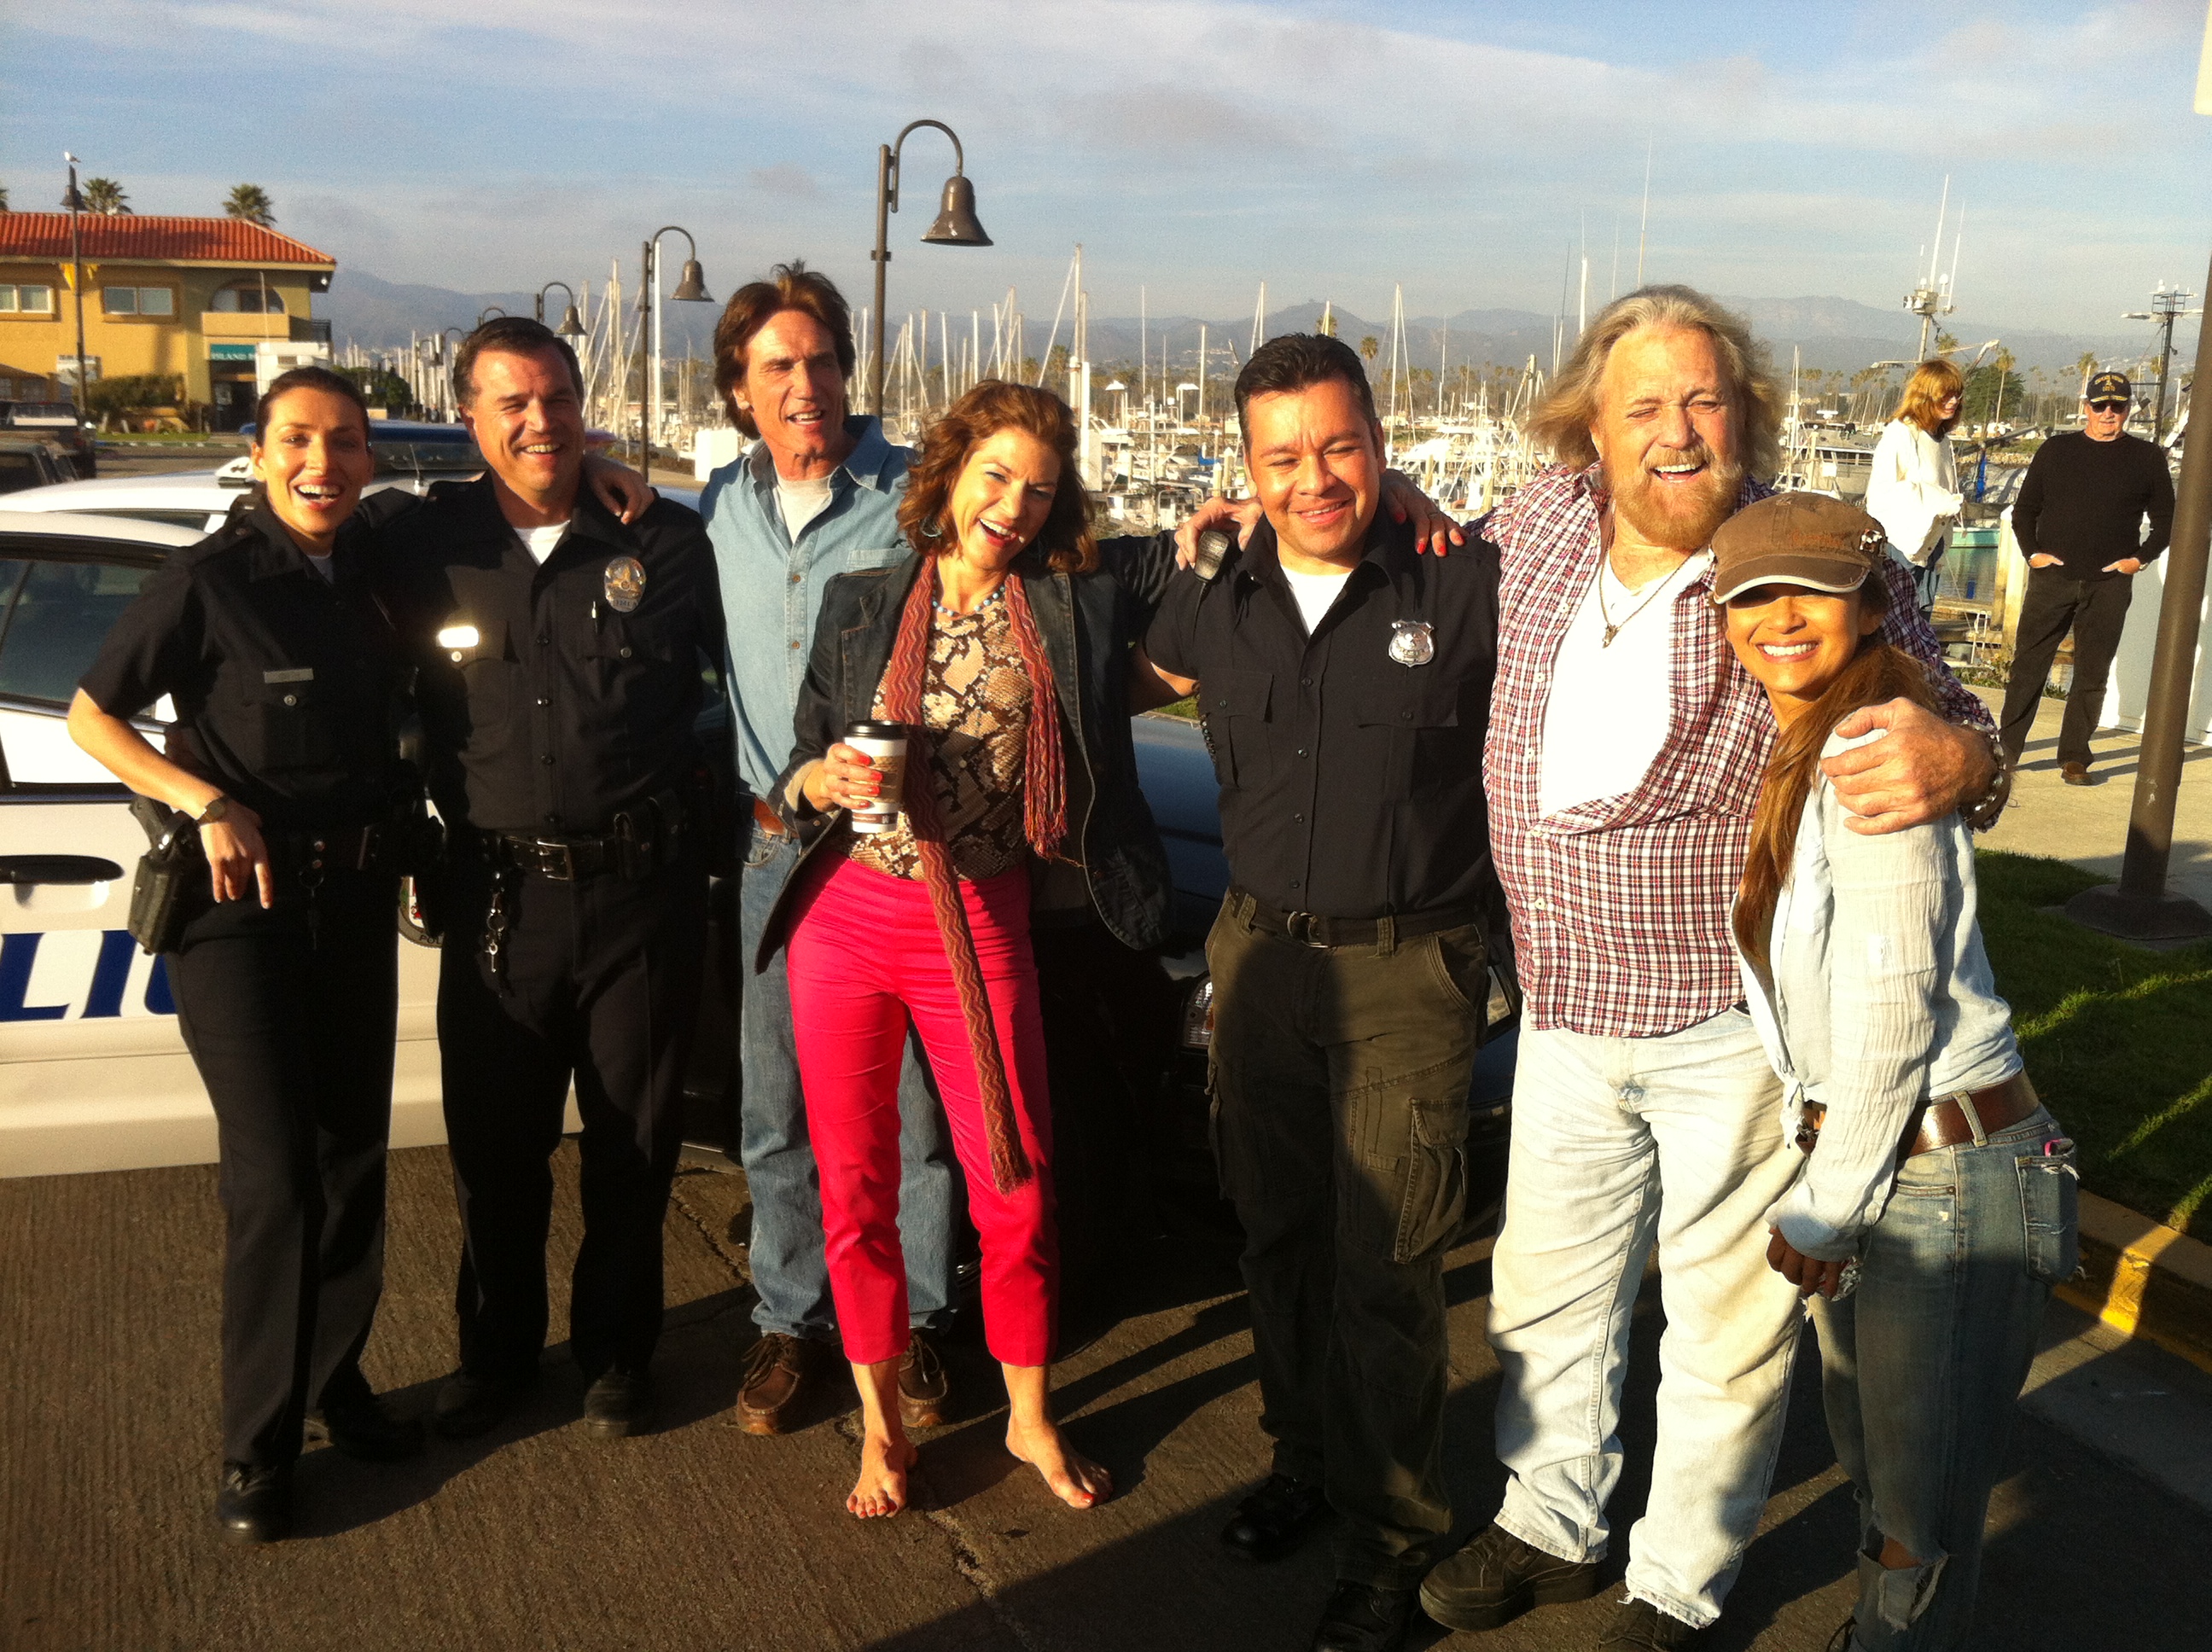 With main cast of 'After Ours' Barry Van Dyke, Rya Kihlstedt, Dan Haggerty (Grizzly Adams) and Nia Peeples.